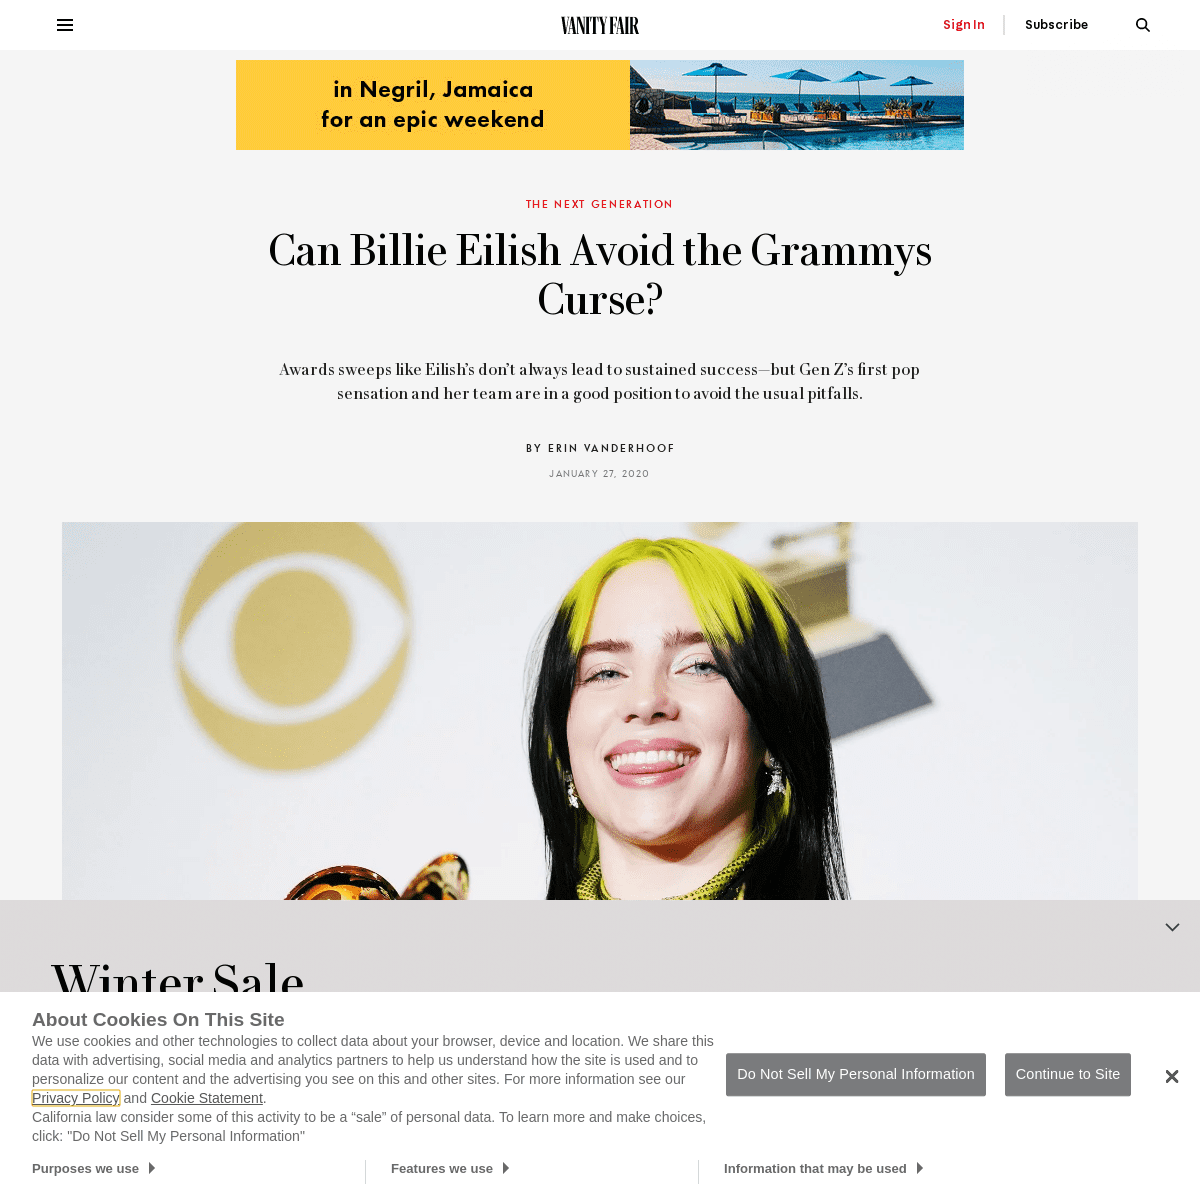 A complete backup of www.vanityfair.com/style/2020/01/can-billie-eilish-avoid-the-grammys-curse